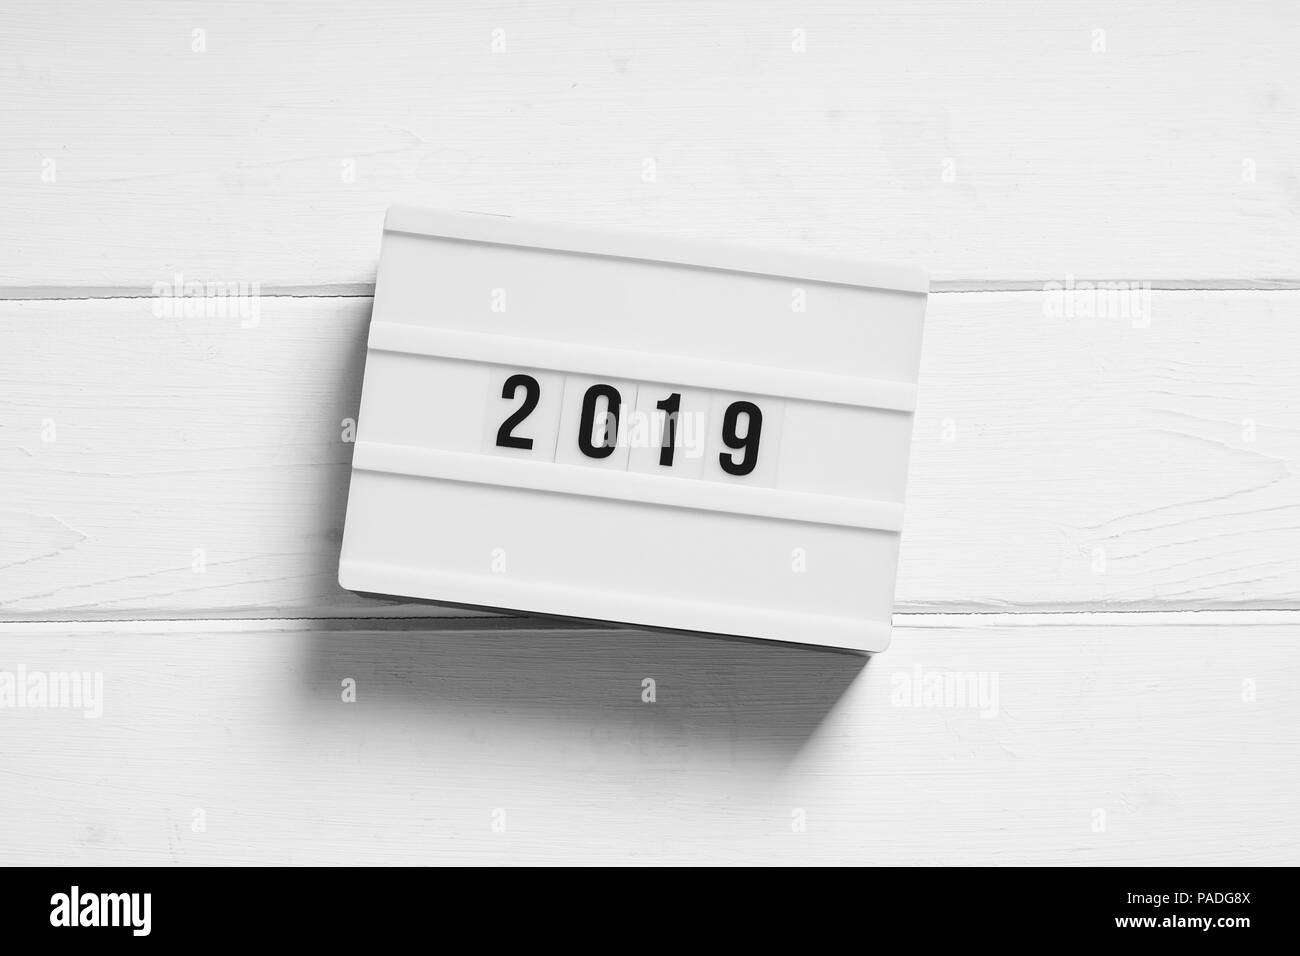 year 2019 on light box sign, minimalist preview or review concept Stock Photo